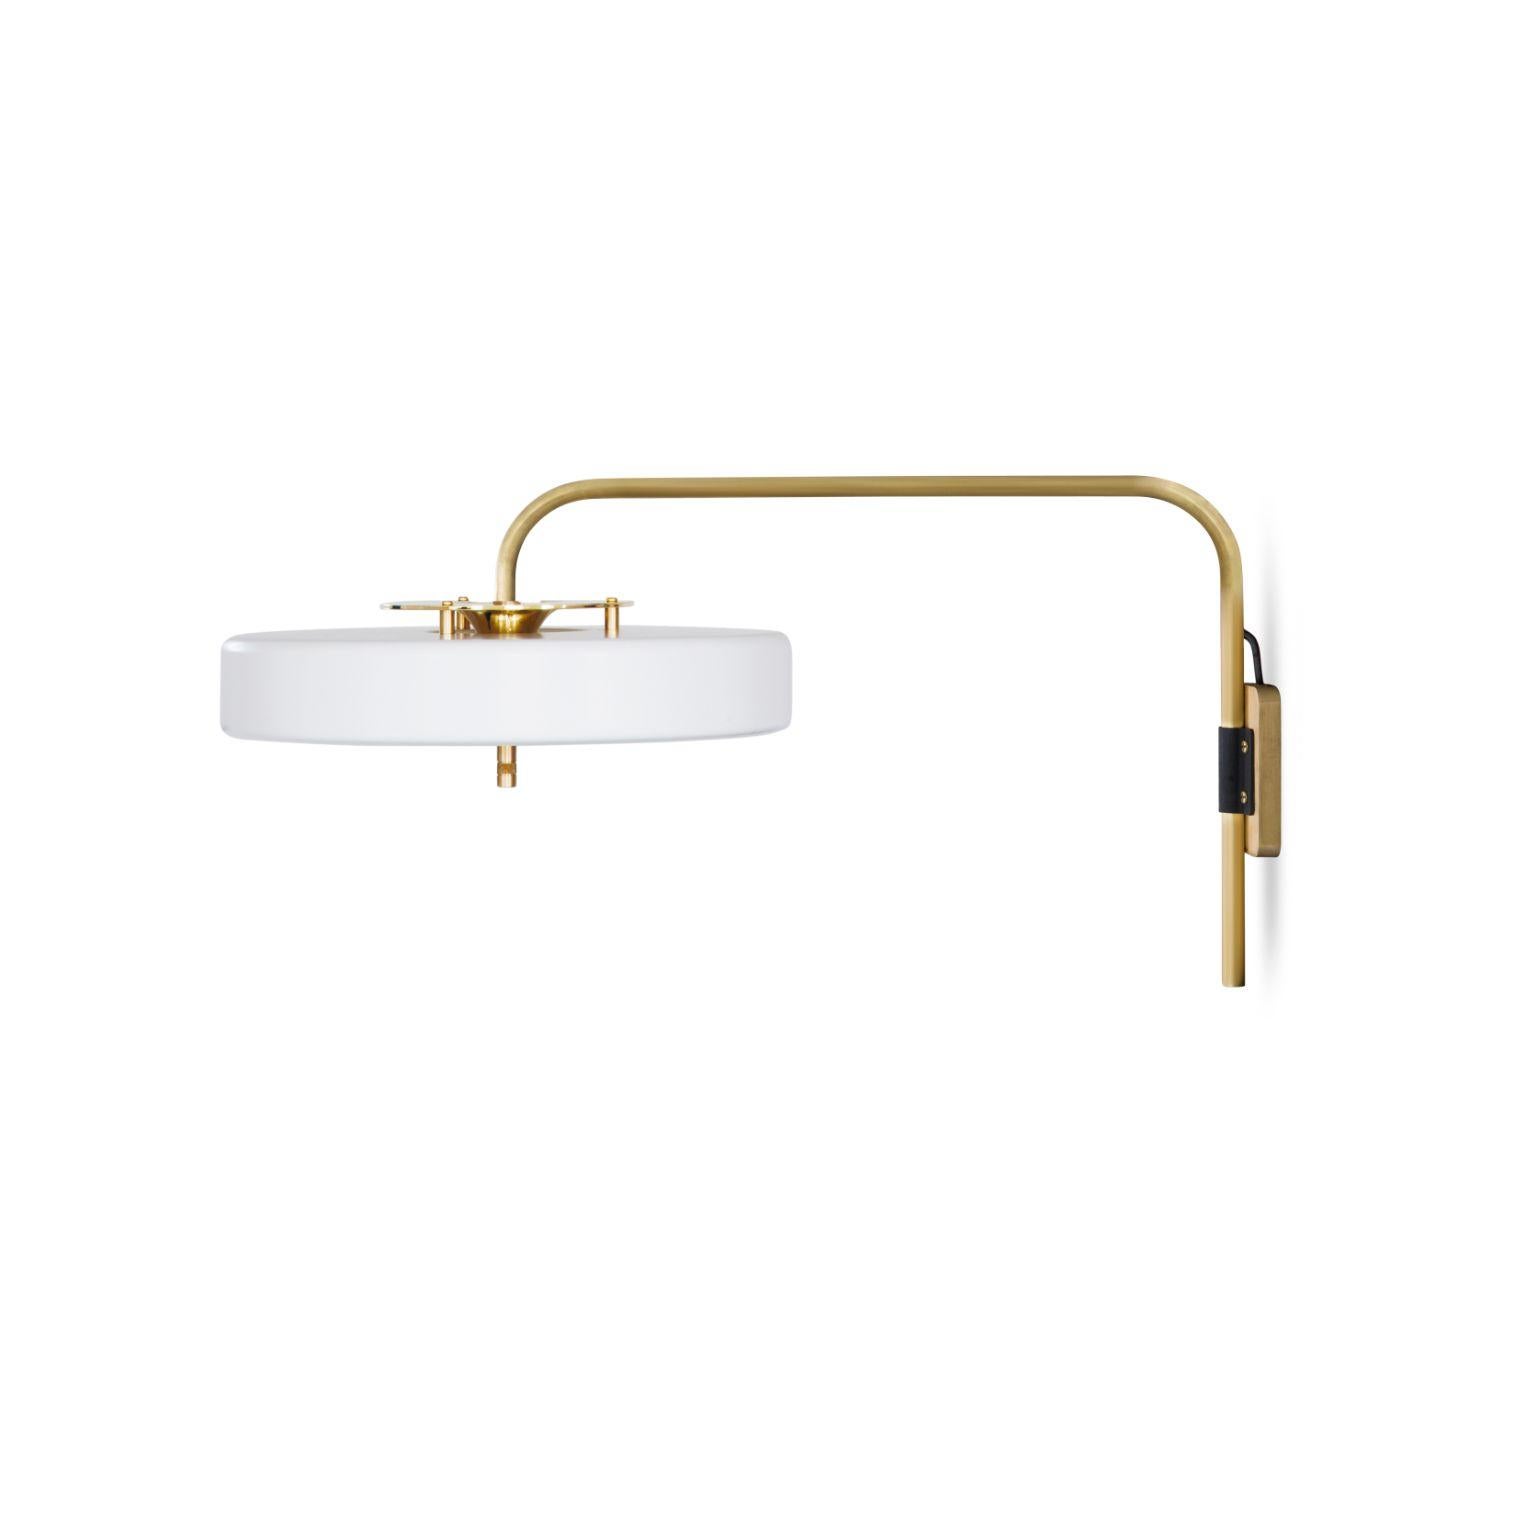 Revolve wall light - brushed brass - white by Bert Frank
Dimensions: 31 x 63 x 35 cm
Materials: Brass, steel

Available in polished brass

Flush-fitting opal glass shade with central dome of polished marble – white Carrara or green Guatemala –